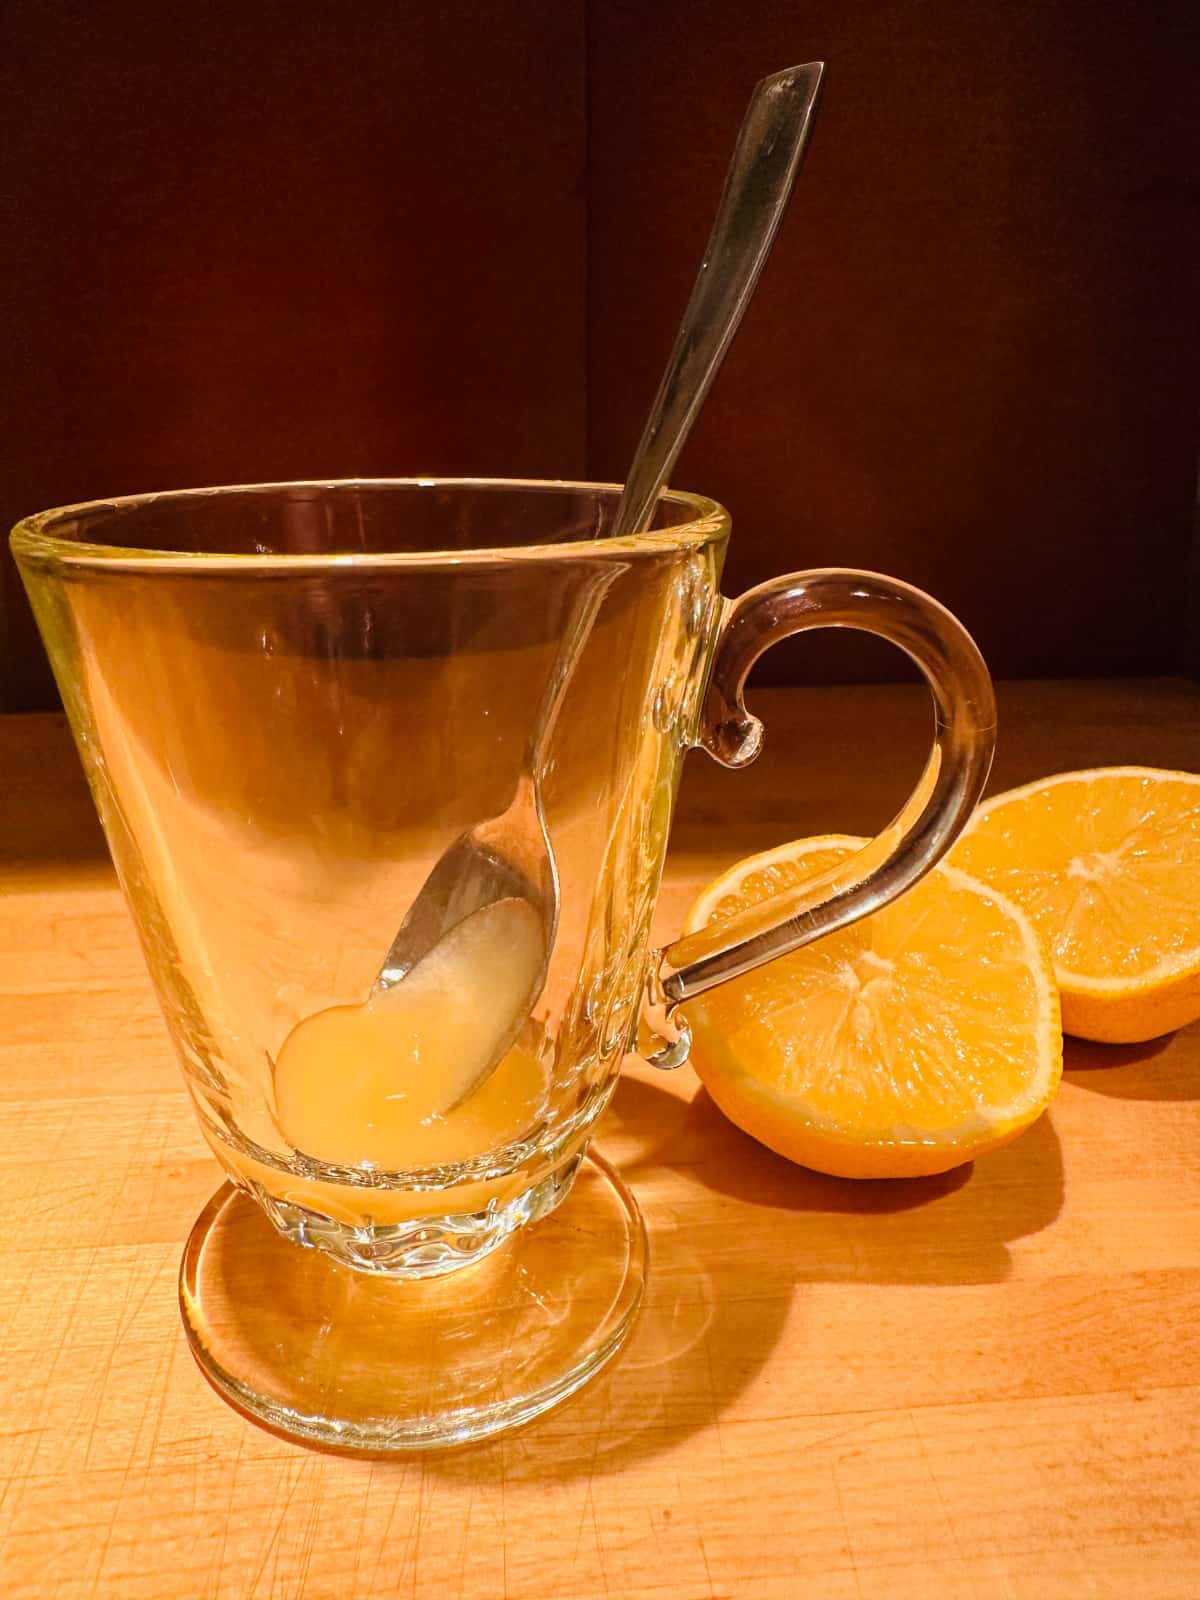 Glass mug with spoon of honey next to two halves of a lemon.